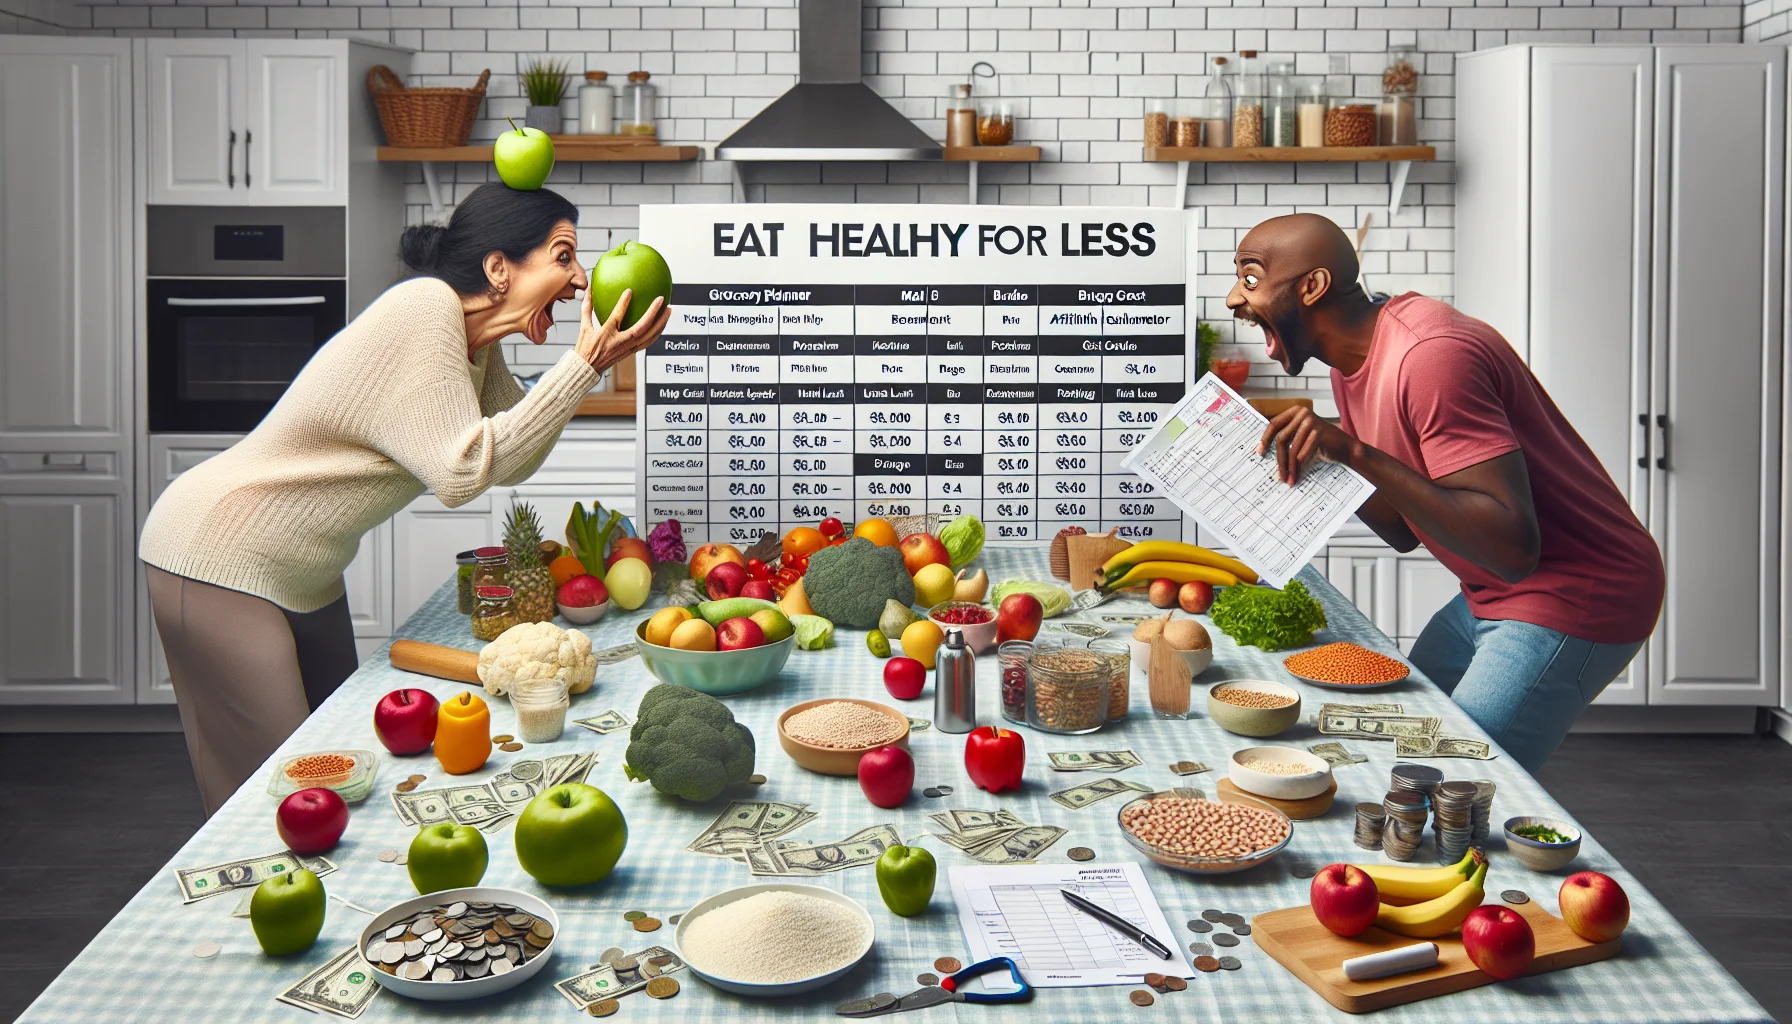 An amusing scenario set in a well-organized kitchen. In the middle, a large table displays essential grocery budgeting tools: a meal planner, a grocery list template, a budget calculator, and various kitchen ingredients, including affordable healthy items like fruits, vegetables, legumes, grains, etc. One area of this table is marked as 'eat healthy for less'. A middle-aged Middle Eastern woman and a young Black man are engaging comedically with the tools. Perhaps the woman is hilariously balancing an apple on her head as the man displays a pile of coins equivalent to the cost of the apple. Create a realistic and cheerful vibe.